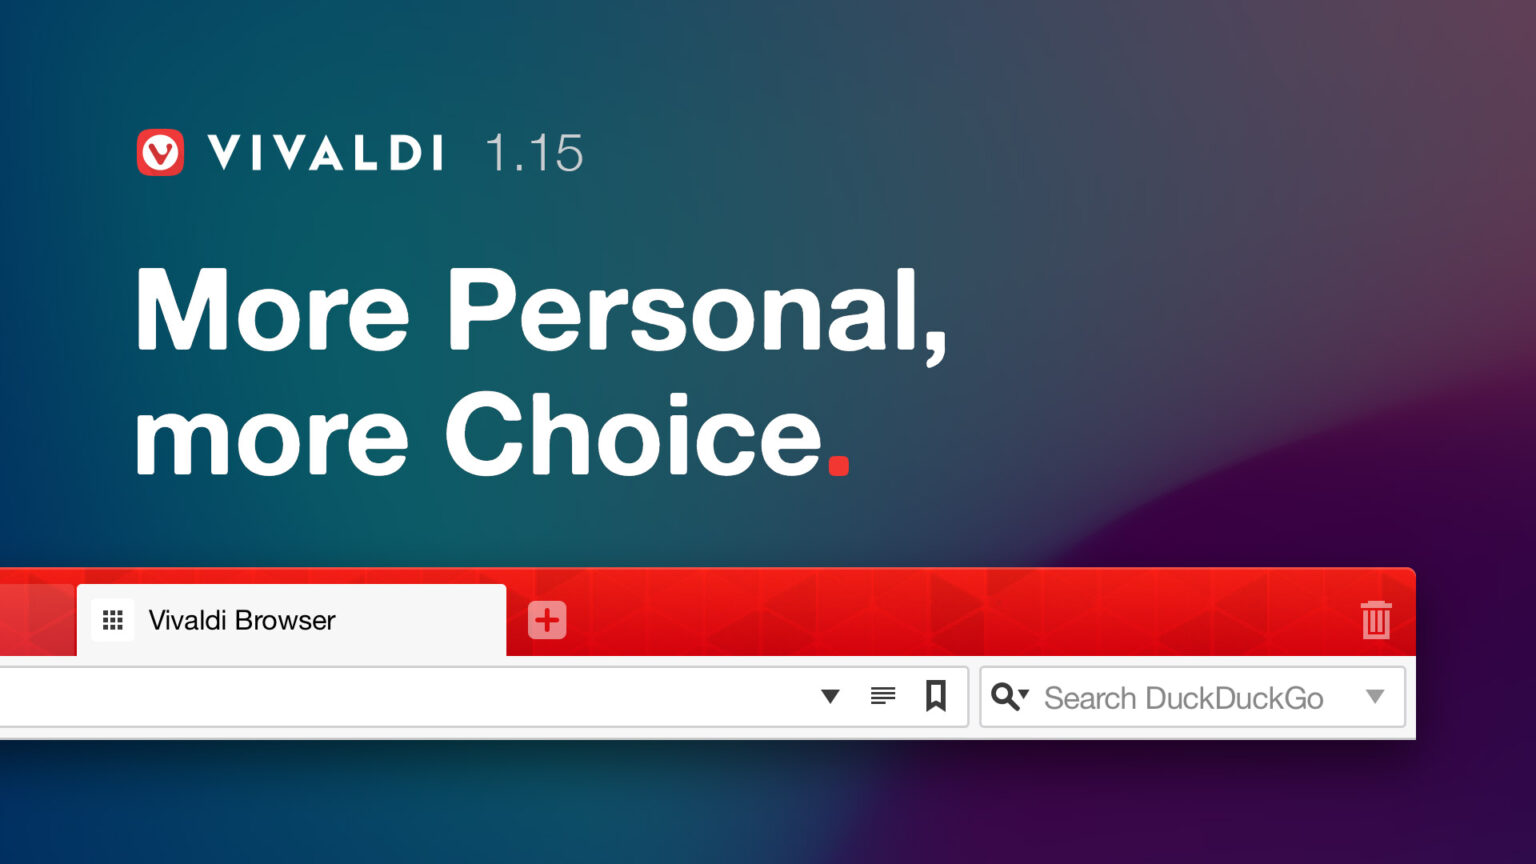 Vivaldi 1.15 Update And The Browser is Just Better